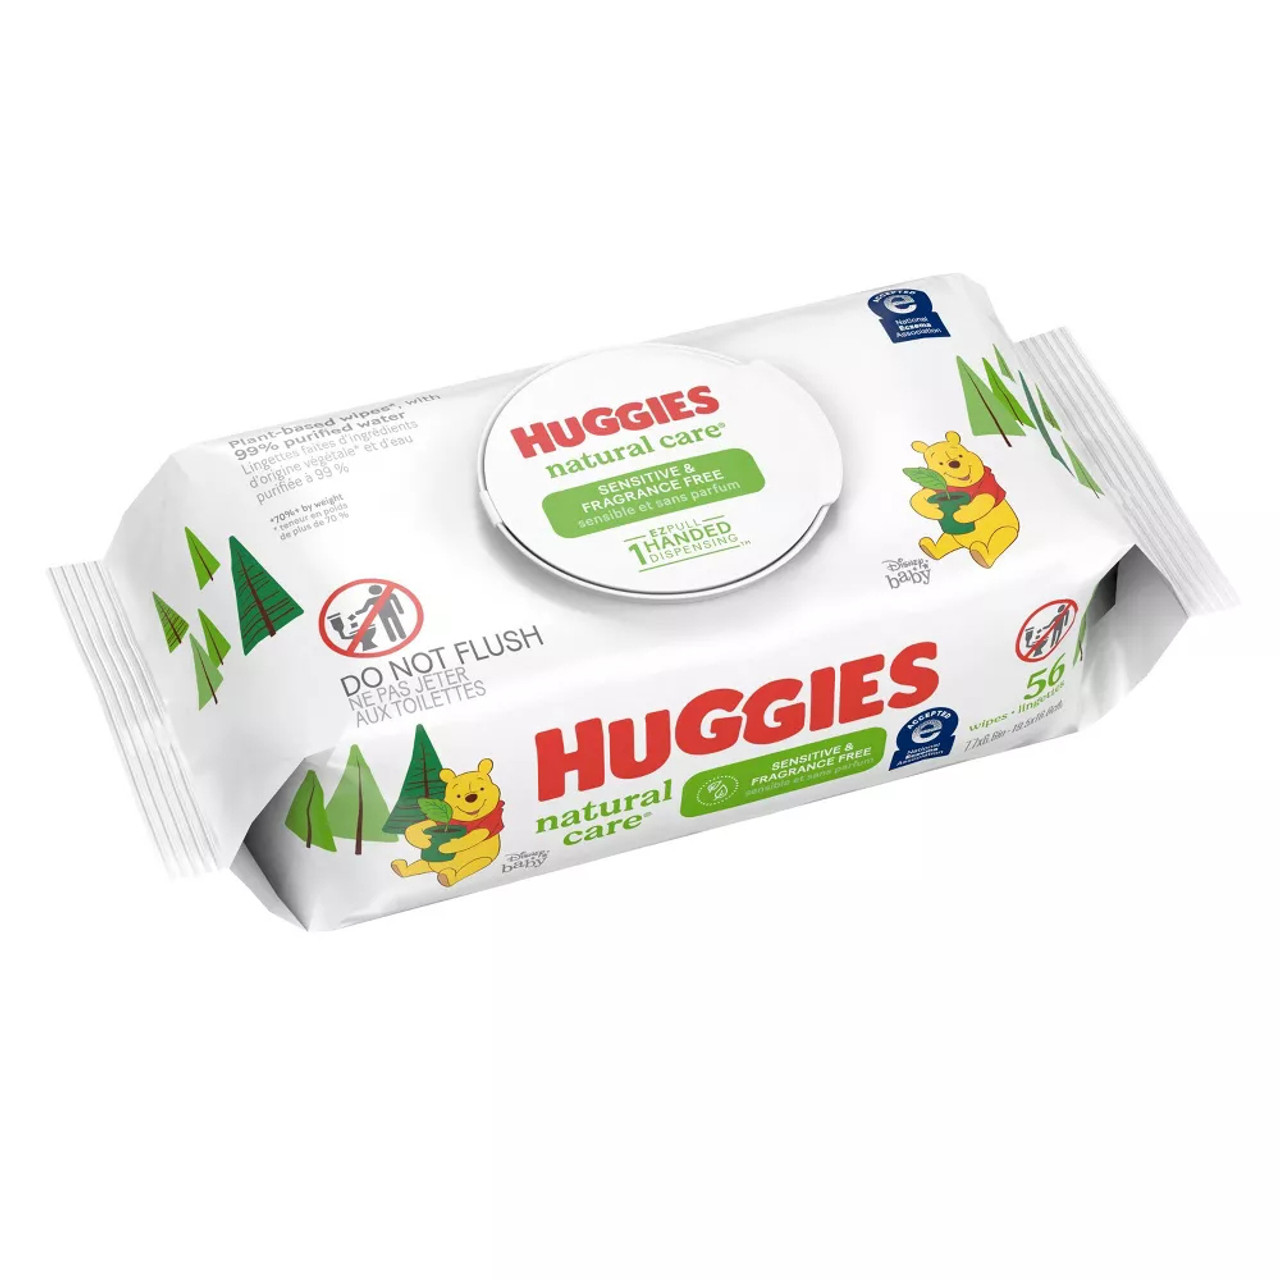 Huggies Natural Care Sensitive Baby Wipes, Unscented, 1 Refill